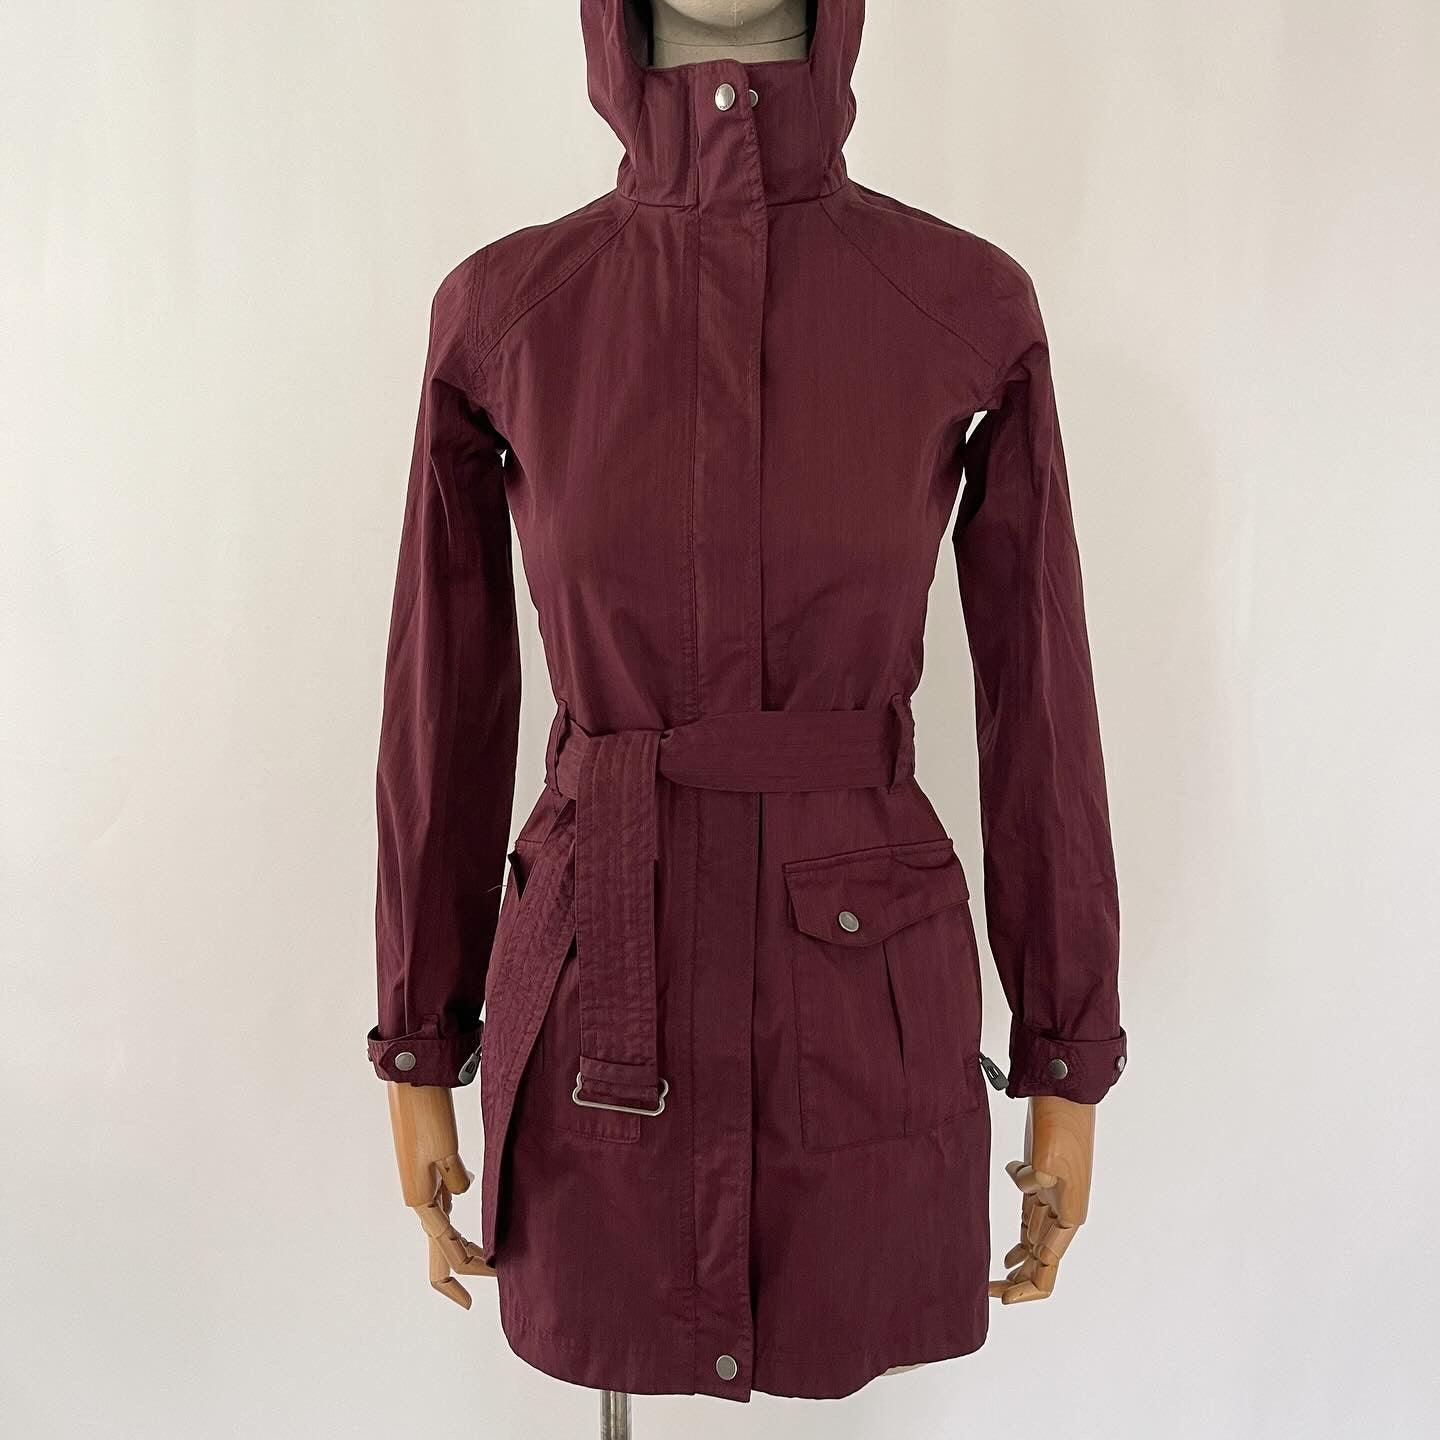 OUTDOOR RESEARCH - OUTDOOR RESEARCH Jacket - AVVIIVVA.COM